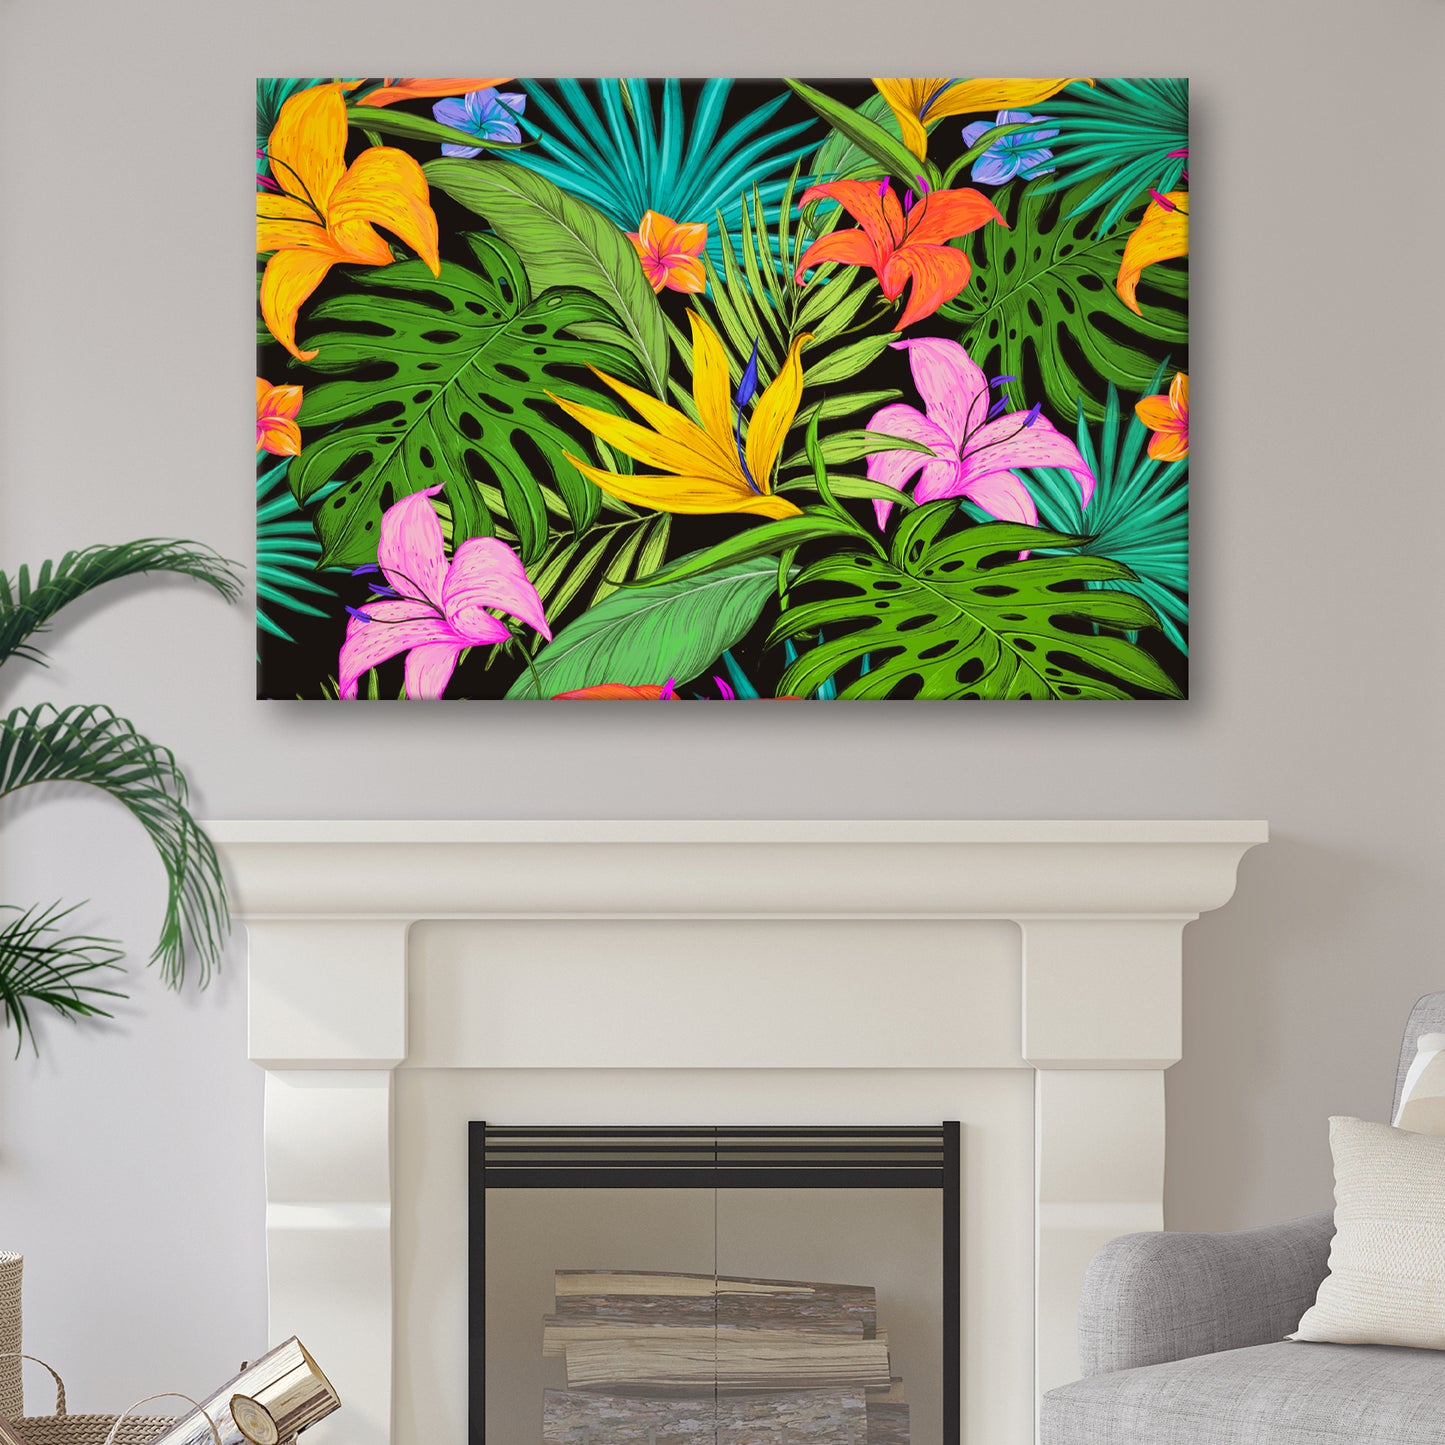 Colorful Tropical Plants Canvas Wall Art Style 2 - Image by Tailored Canvases